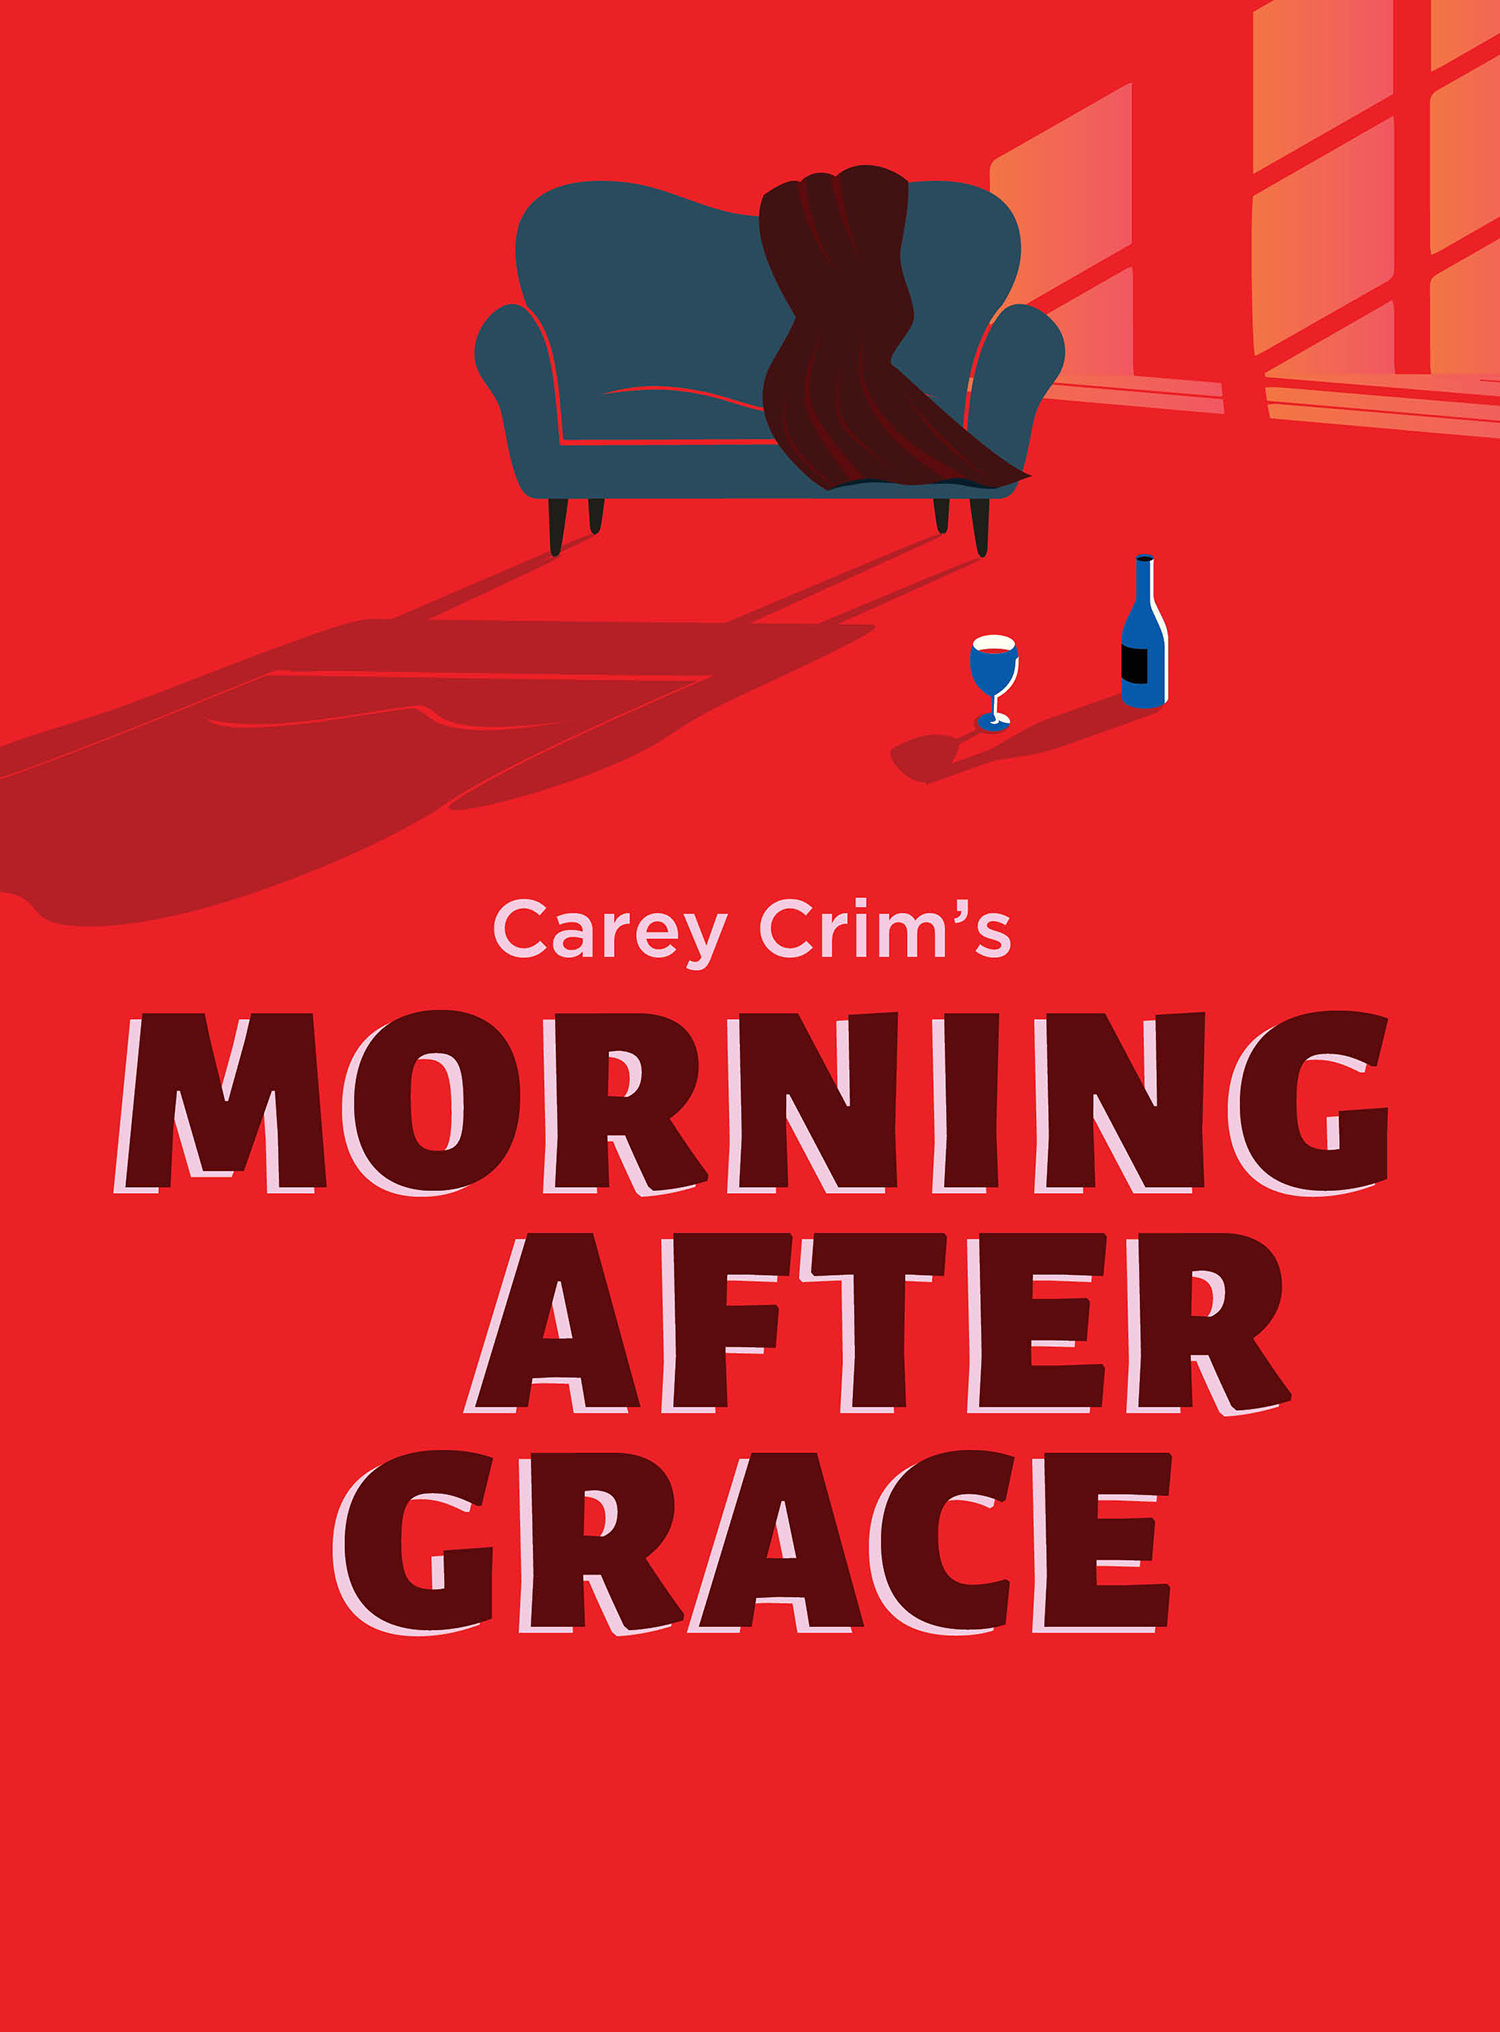 Morning After Grace